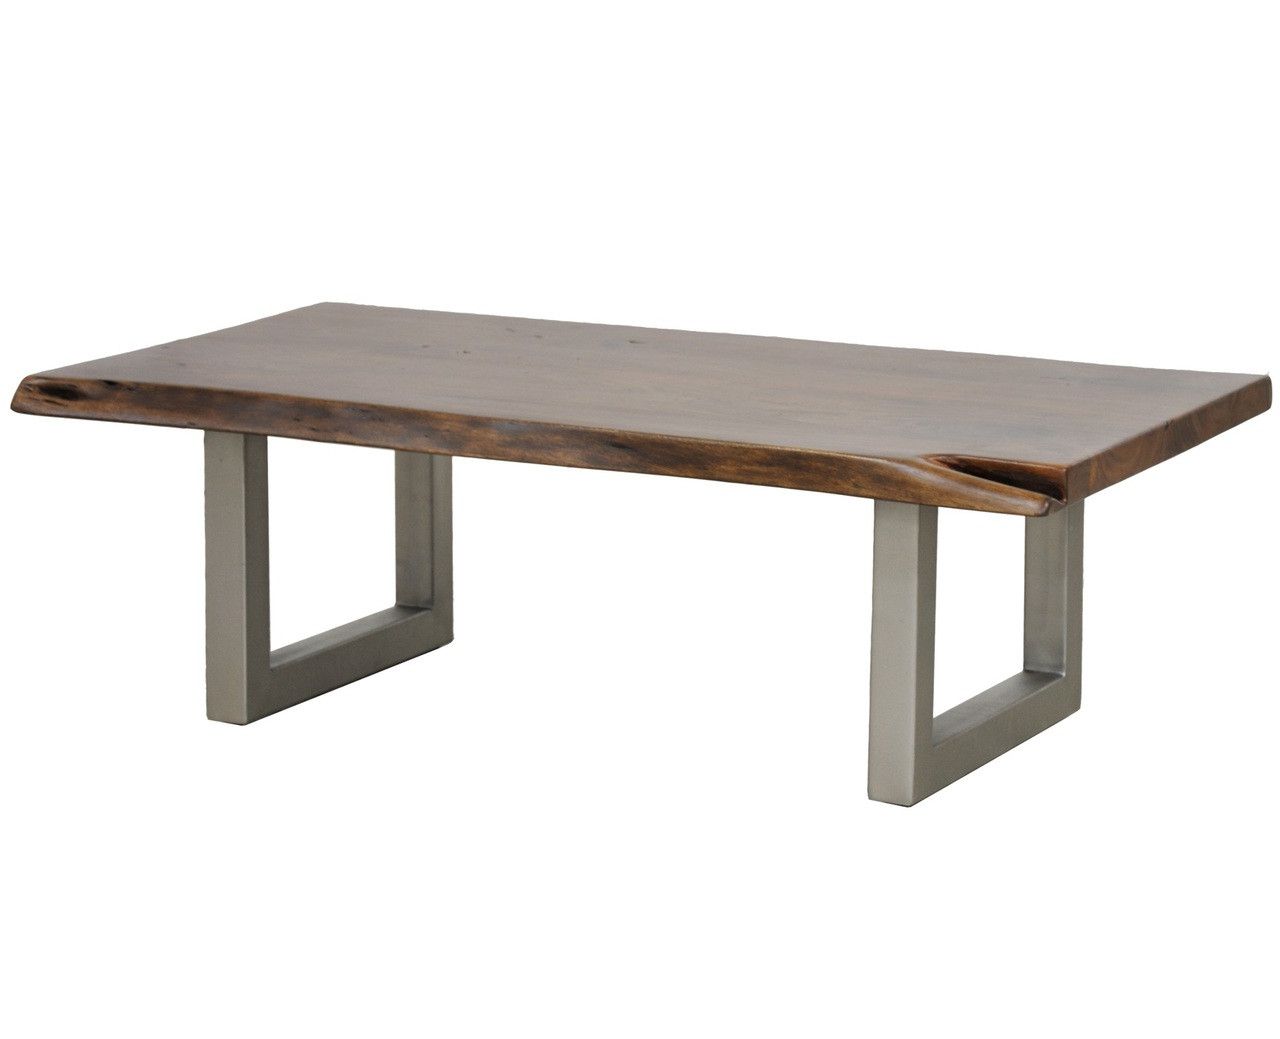 Montana Solid Wood Metal Leg Coffee Table | Zin Home Throughout Coffee Tables With Solid Legs (Gallery 8 of 20)